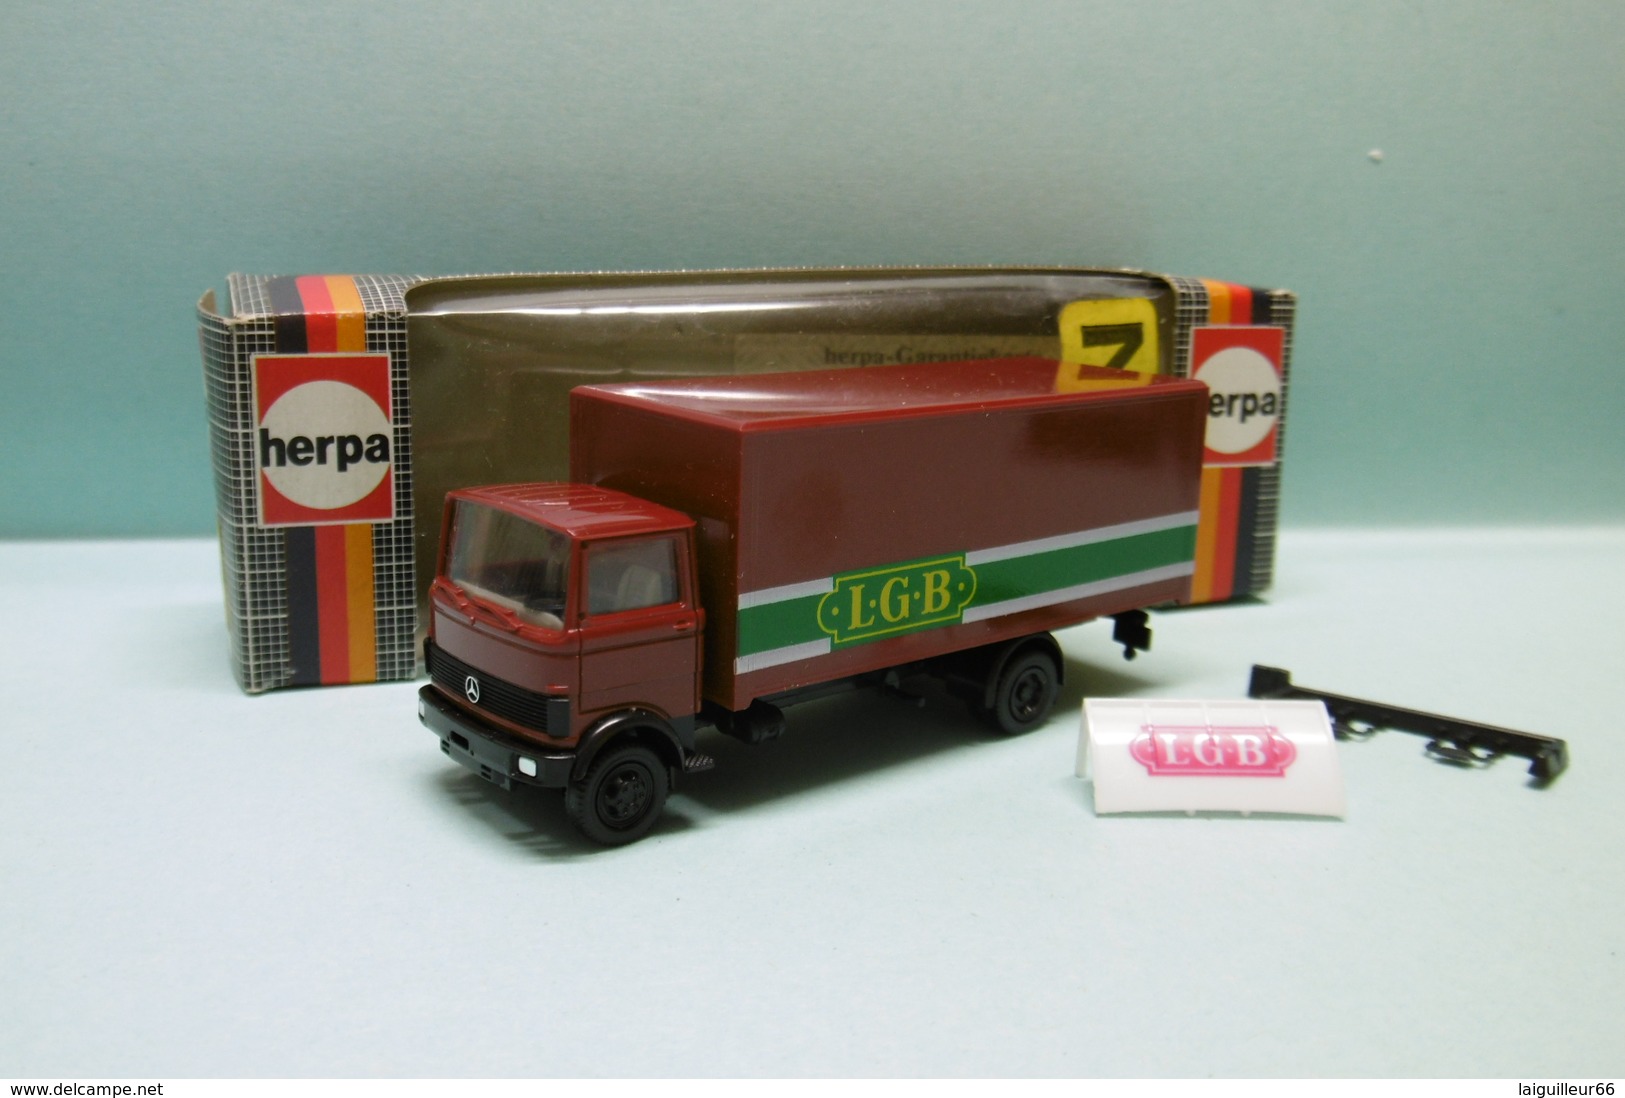 Herpa - CAMION MERCEDES BENZ LGB Réf. 814392 Neuf NBO HO 1/87 - Véhicules Routiers